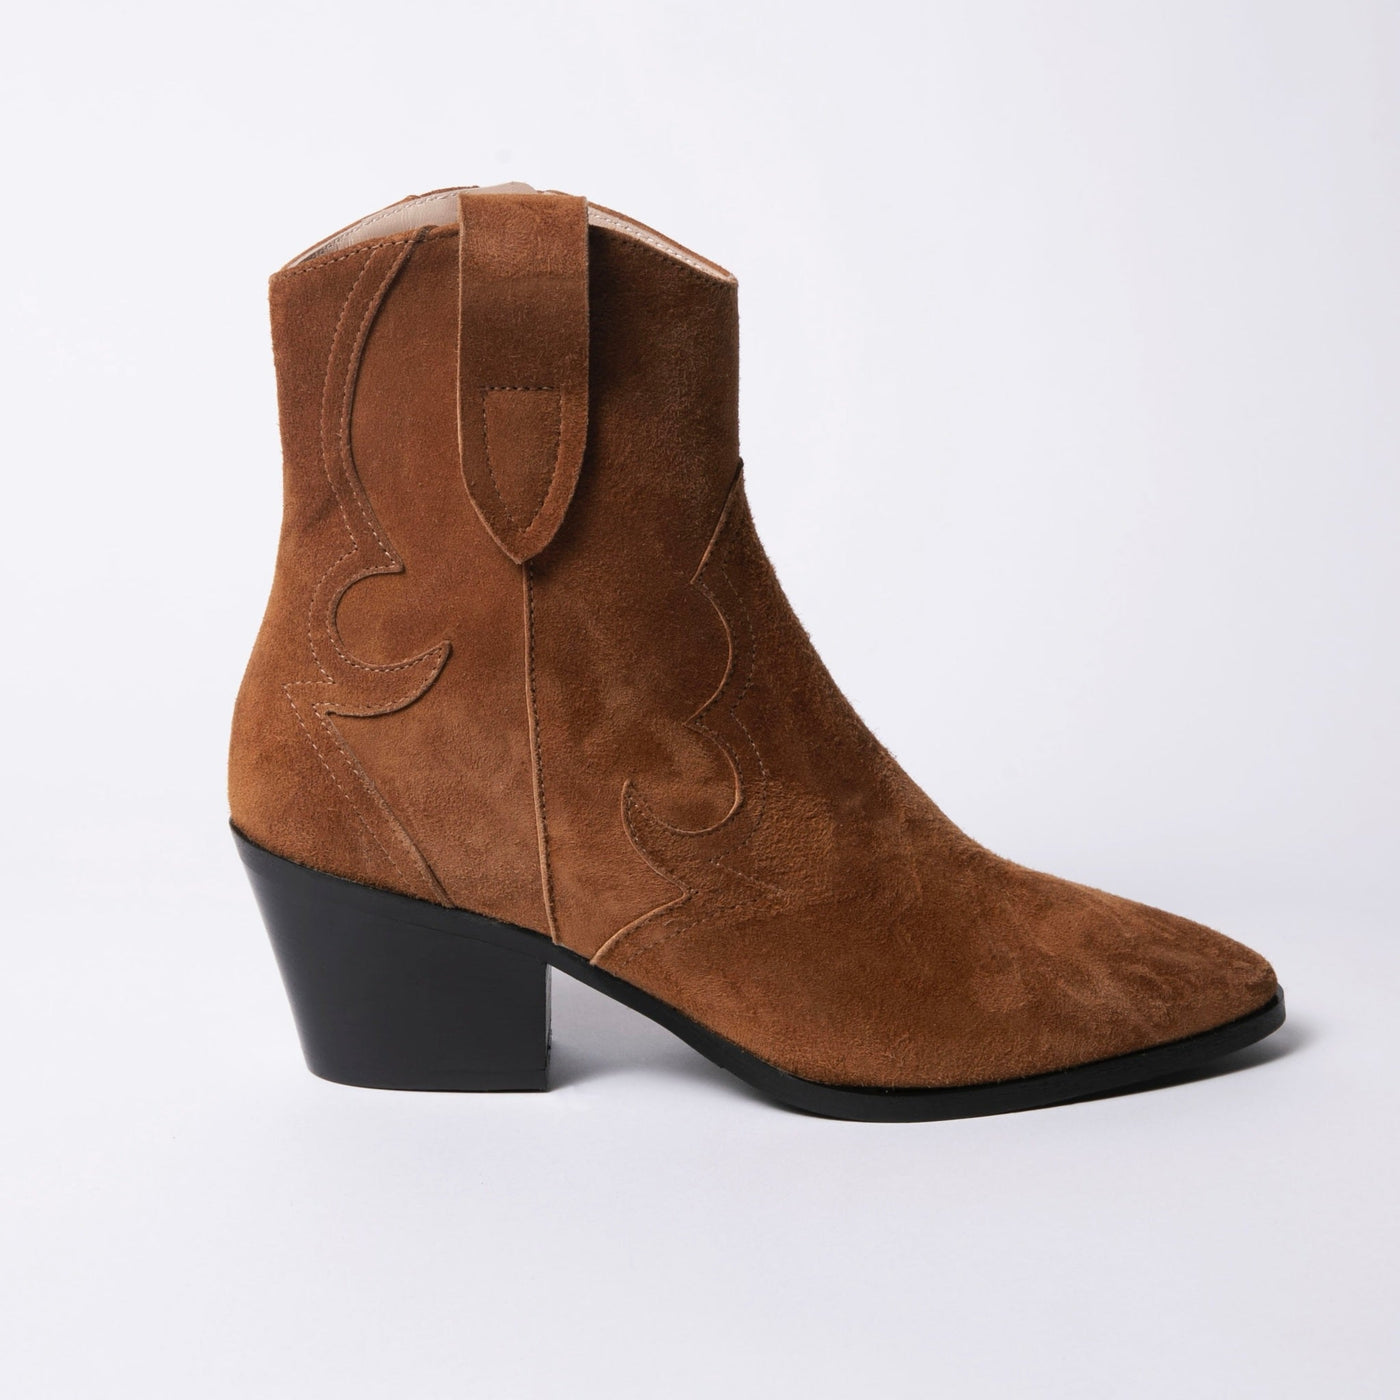 Short Cowboy Boots in Cognac Suede. Featuring western stiching. 